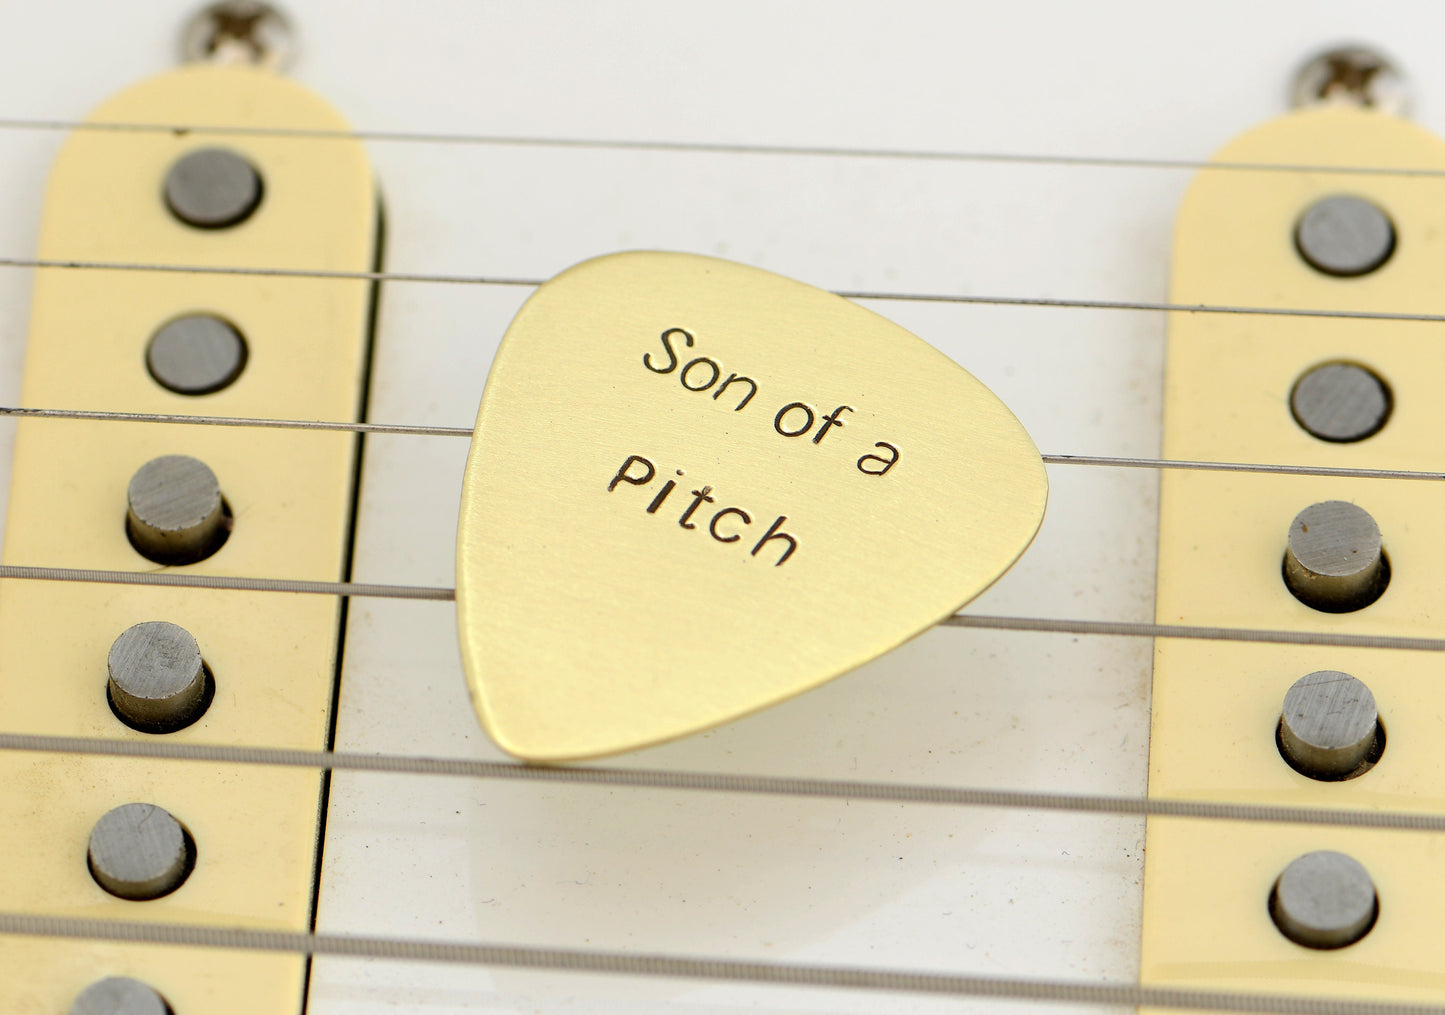 Son of a Pitch Bronze Guitar Pick